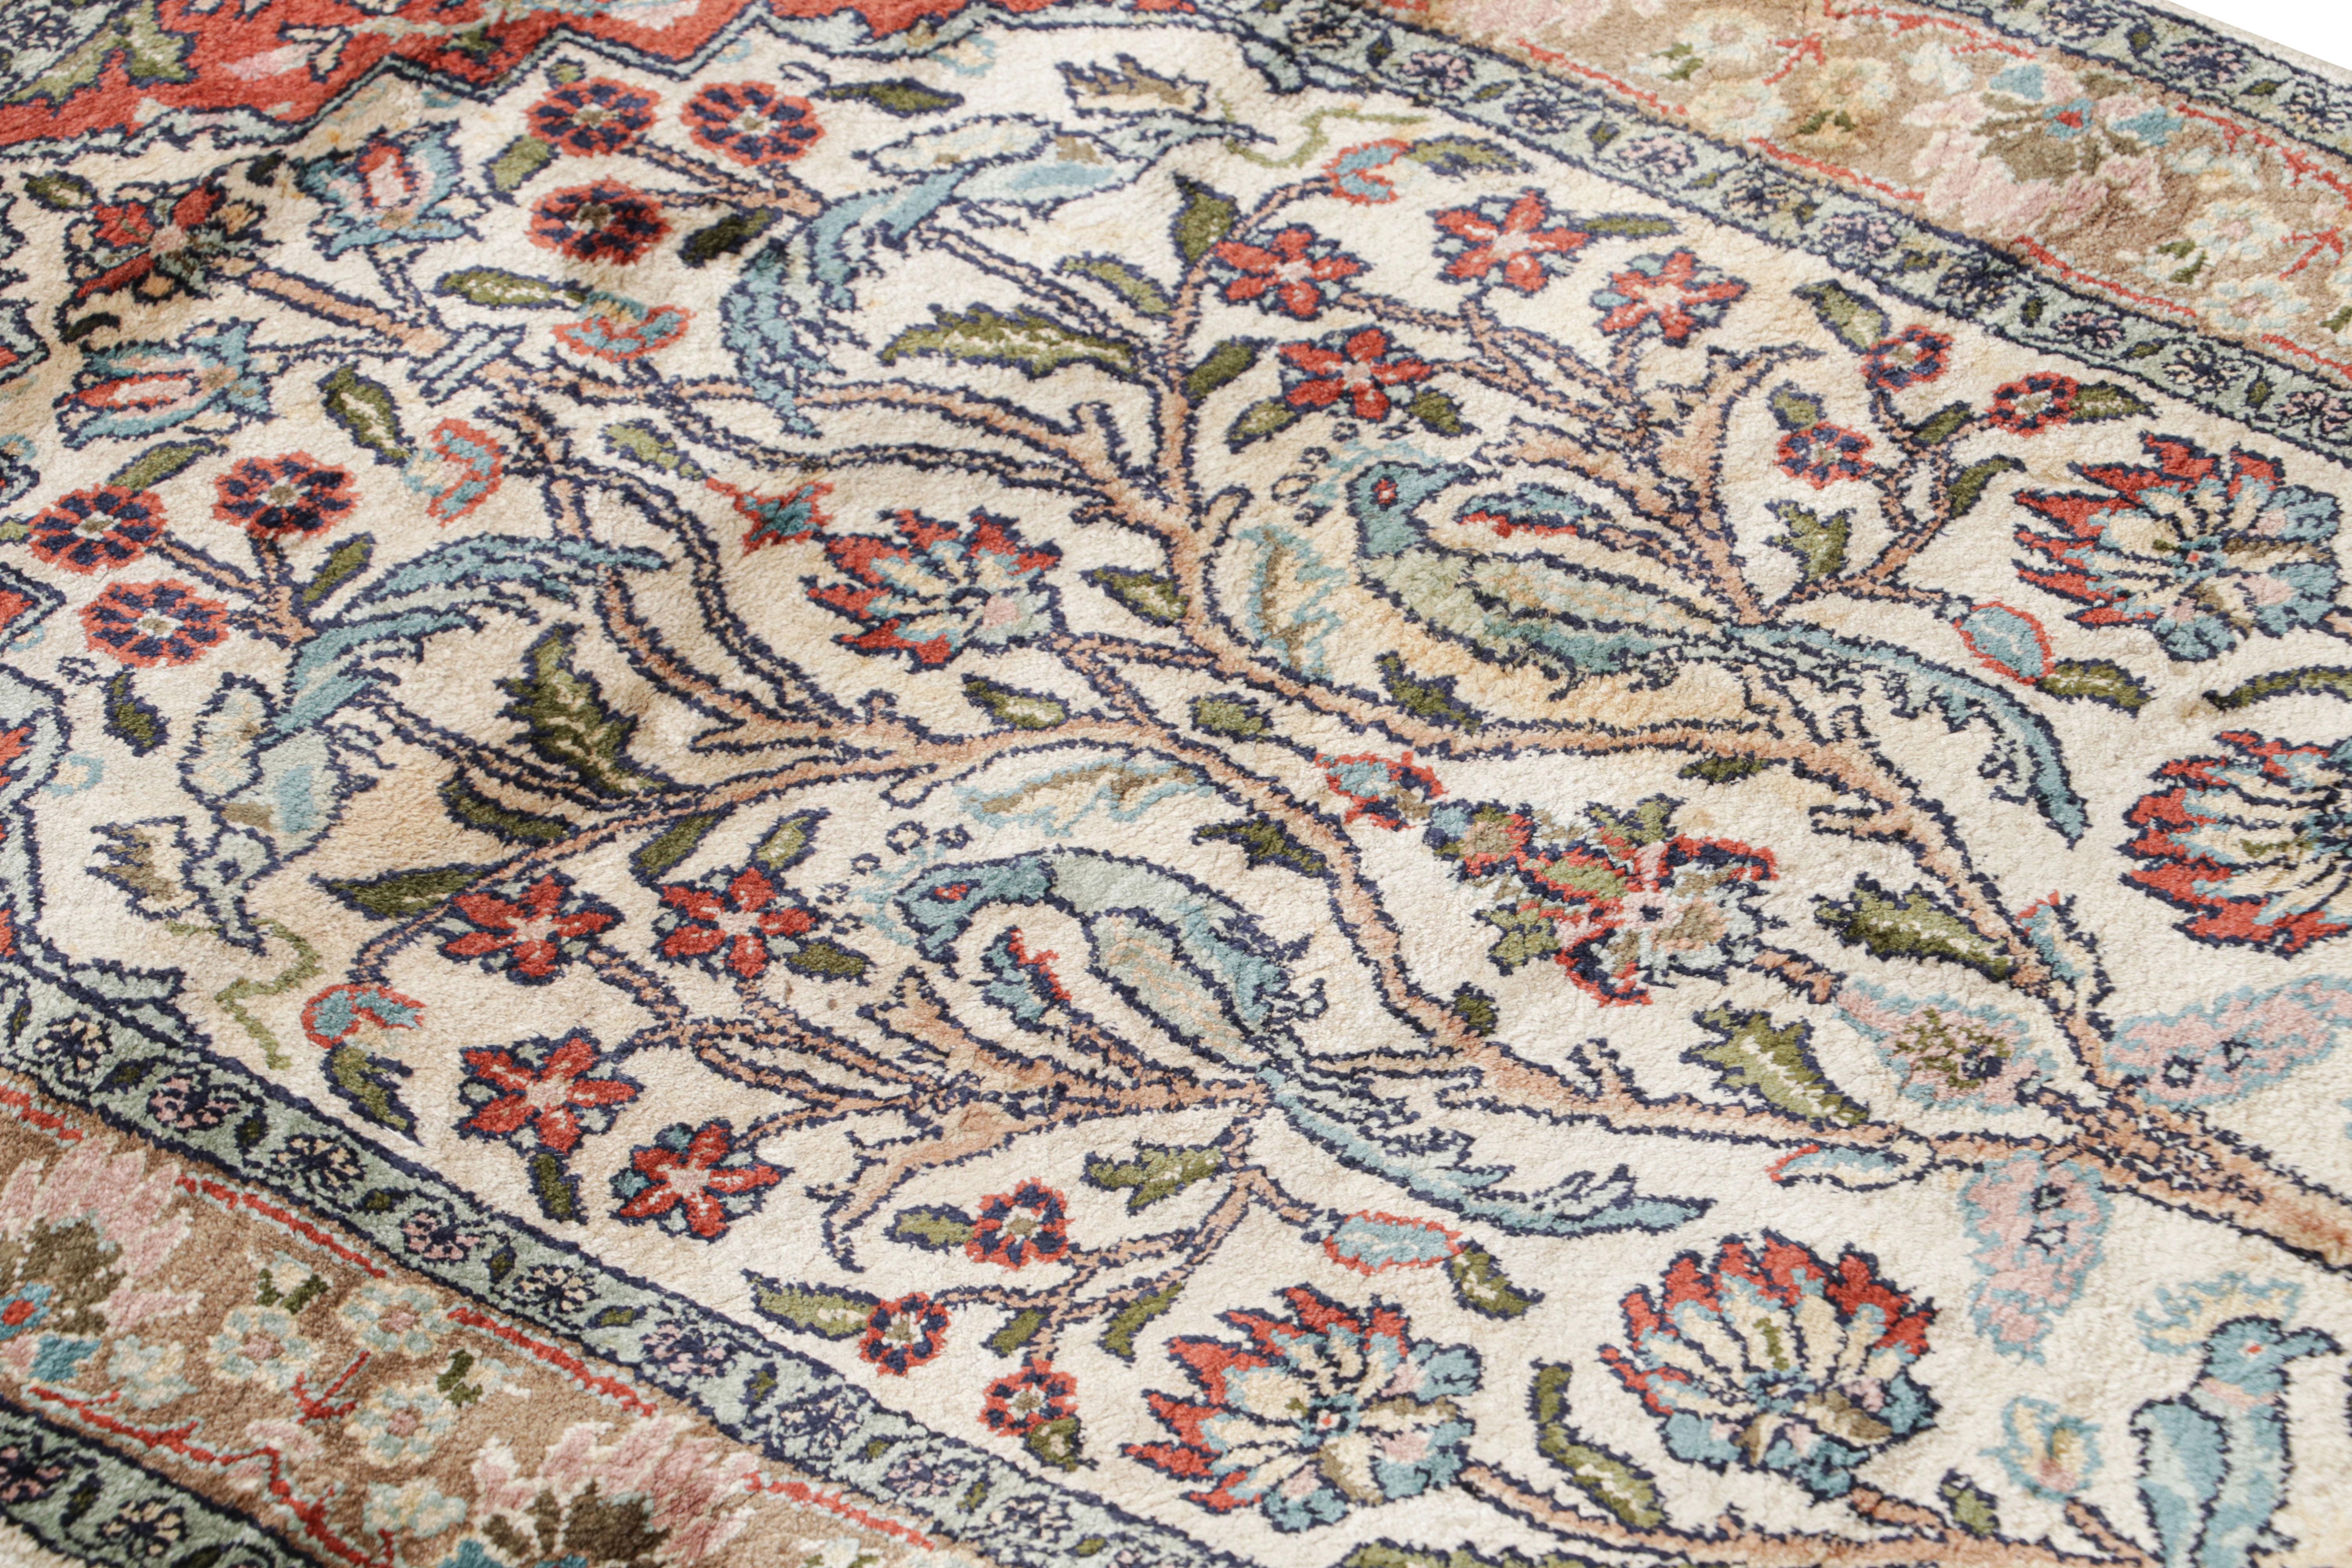 Indian Rug & Kilim’s Persian style Rug in Beige with Floral Pictorial Patterns